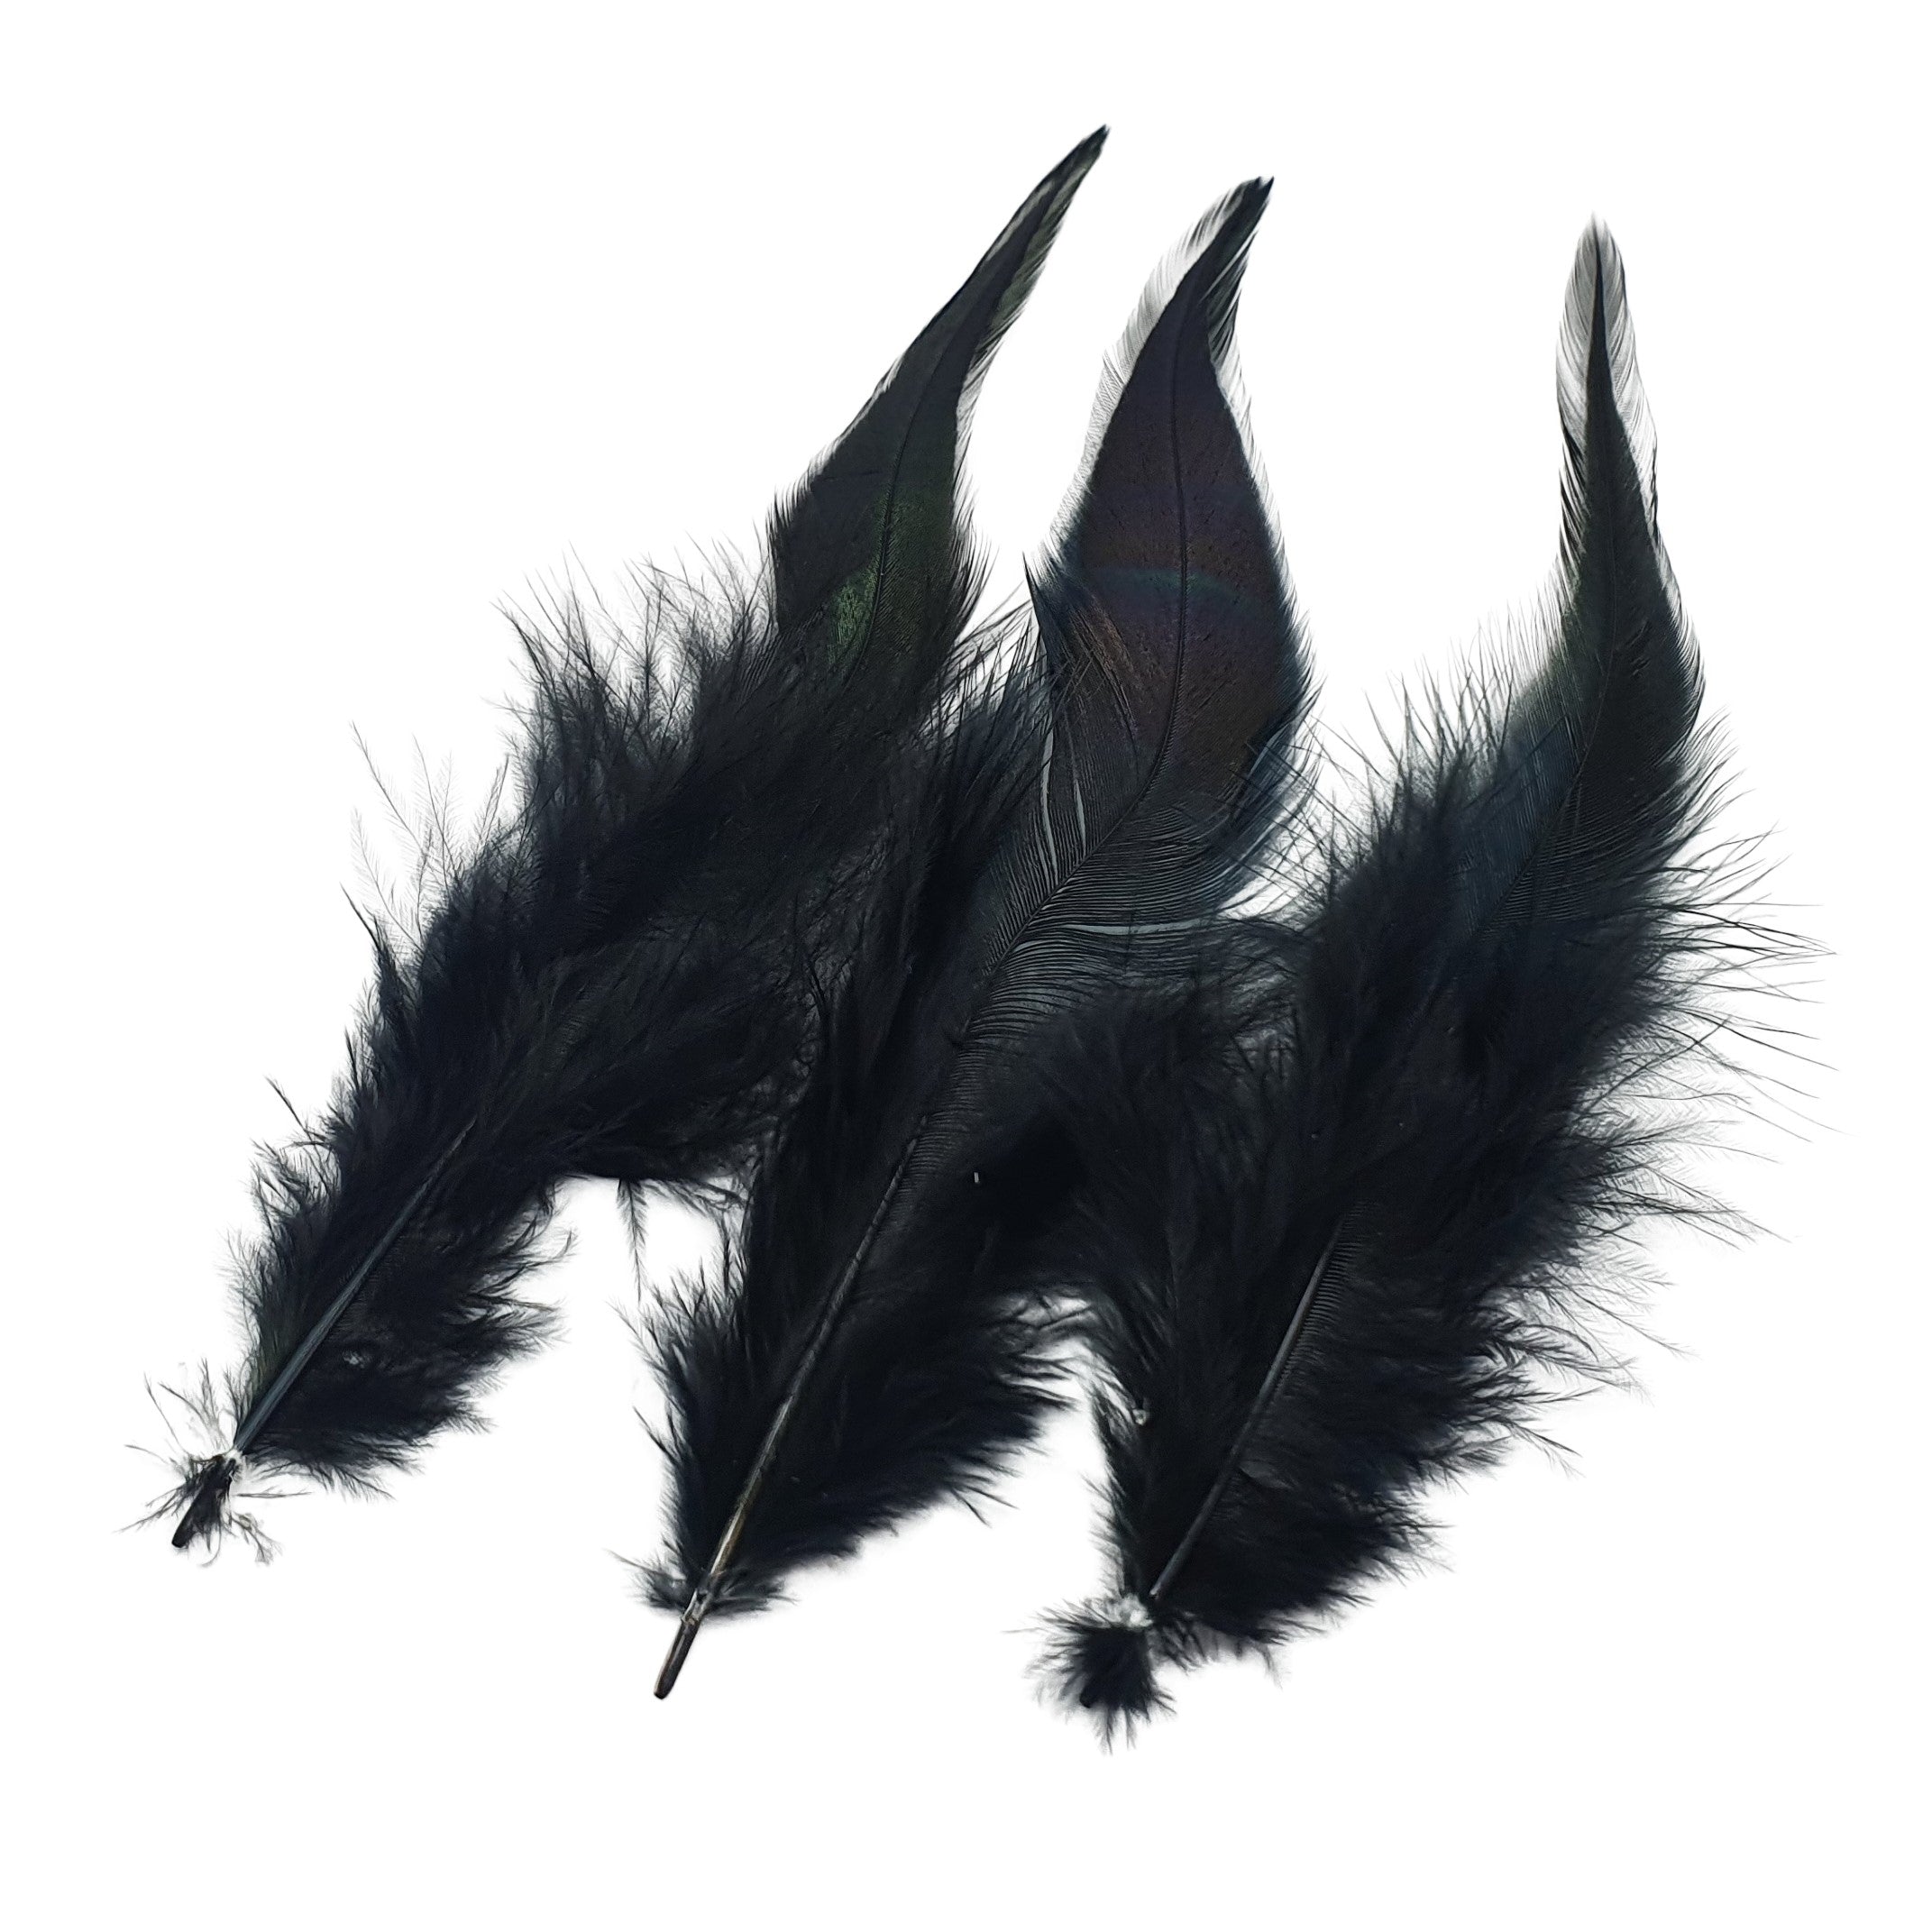 Black Cock Rooster Feathers Strung (Bundle)